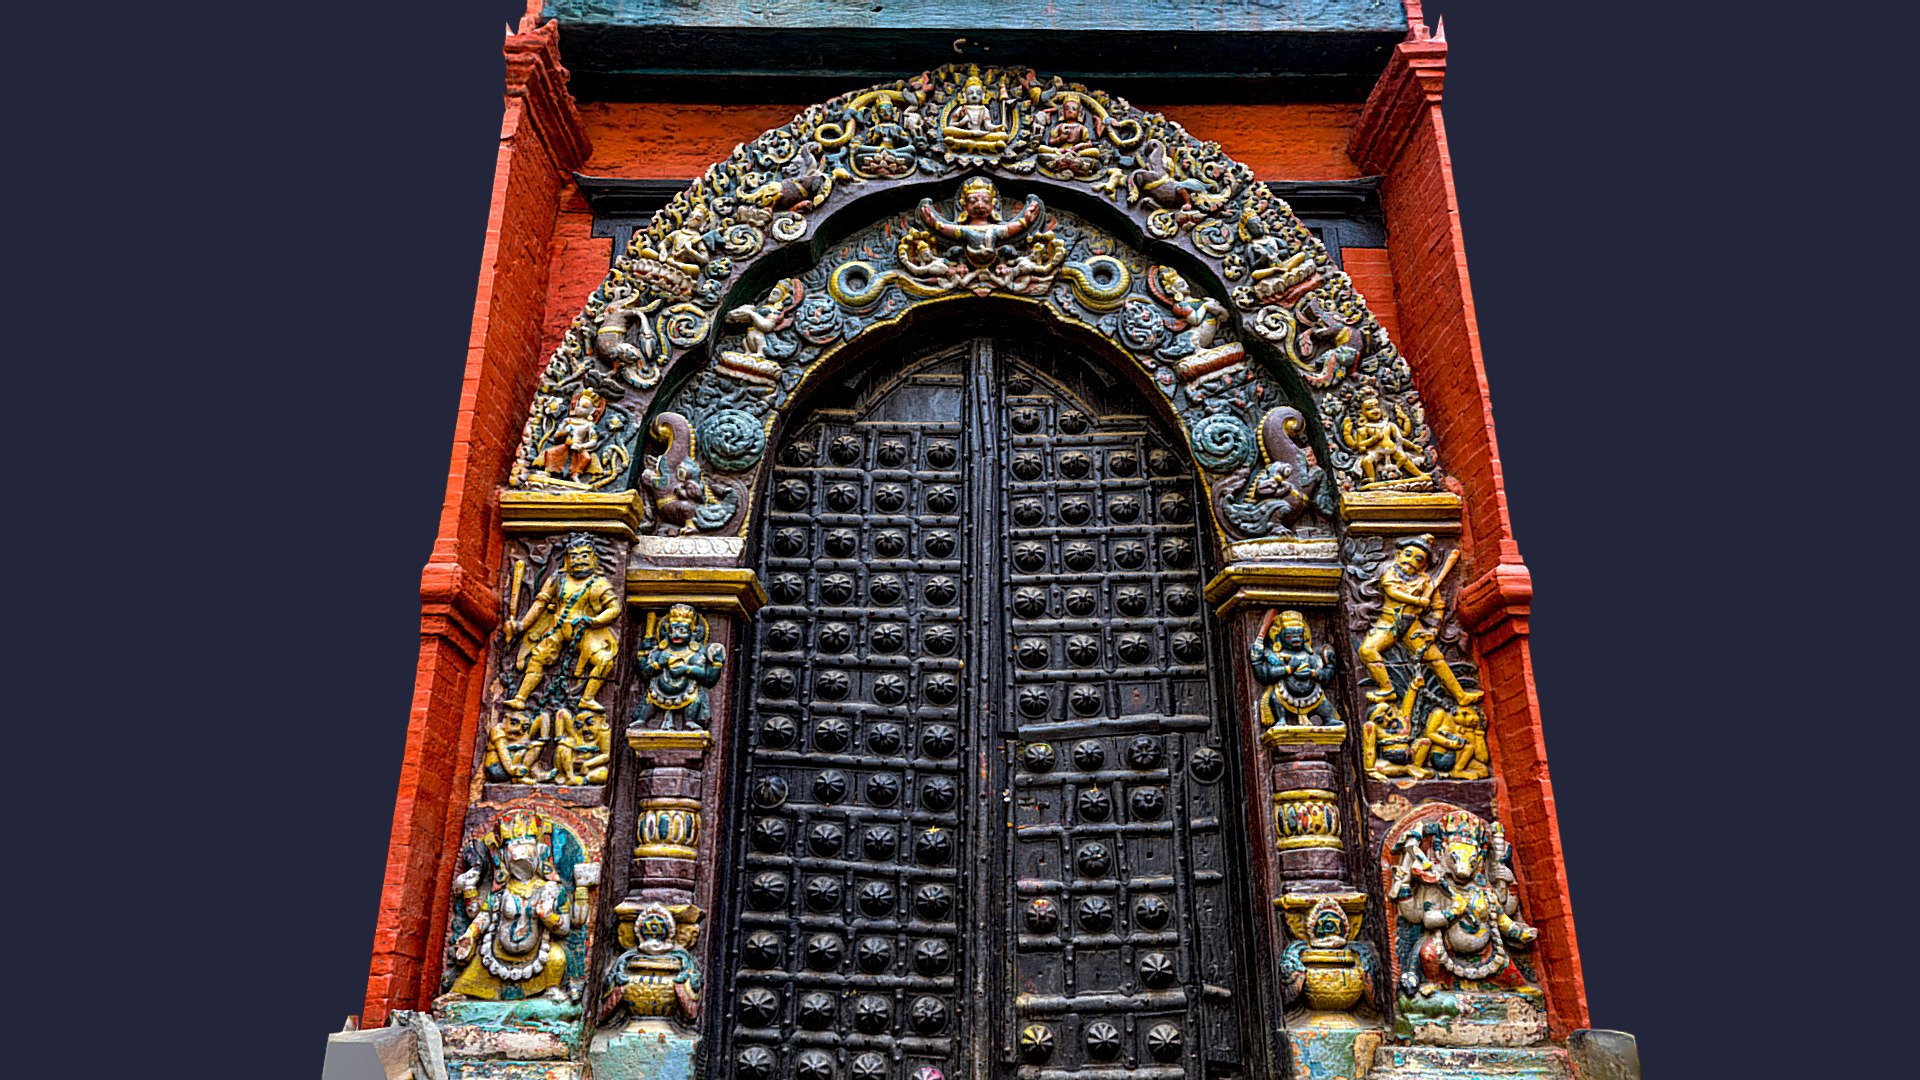 Main entrance gate to Taleju Temple in Hanuman Dhoka inside Kathmandu durbar square.

This temple together with the door, was built in 1564 AD by Mahendra Malla. This temple is one of the holiest temple in Nepal as this temple or this big door is opened only once a year in the festival of dashain. 

Every year in the festival of dashain, a mass killing of animals takes place here as a belief that sacrificing animals pleases &ldquo;Durga